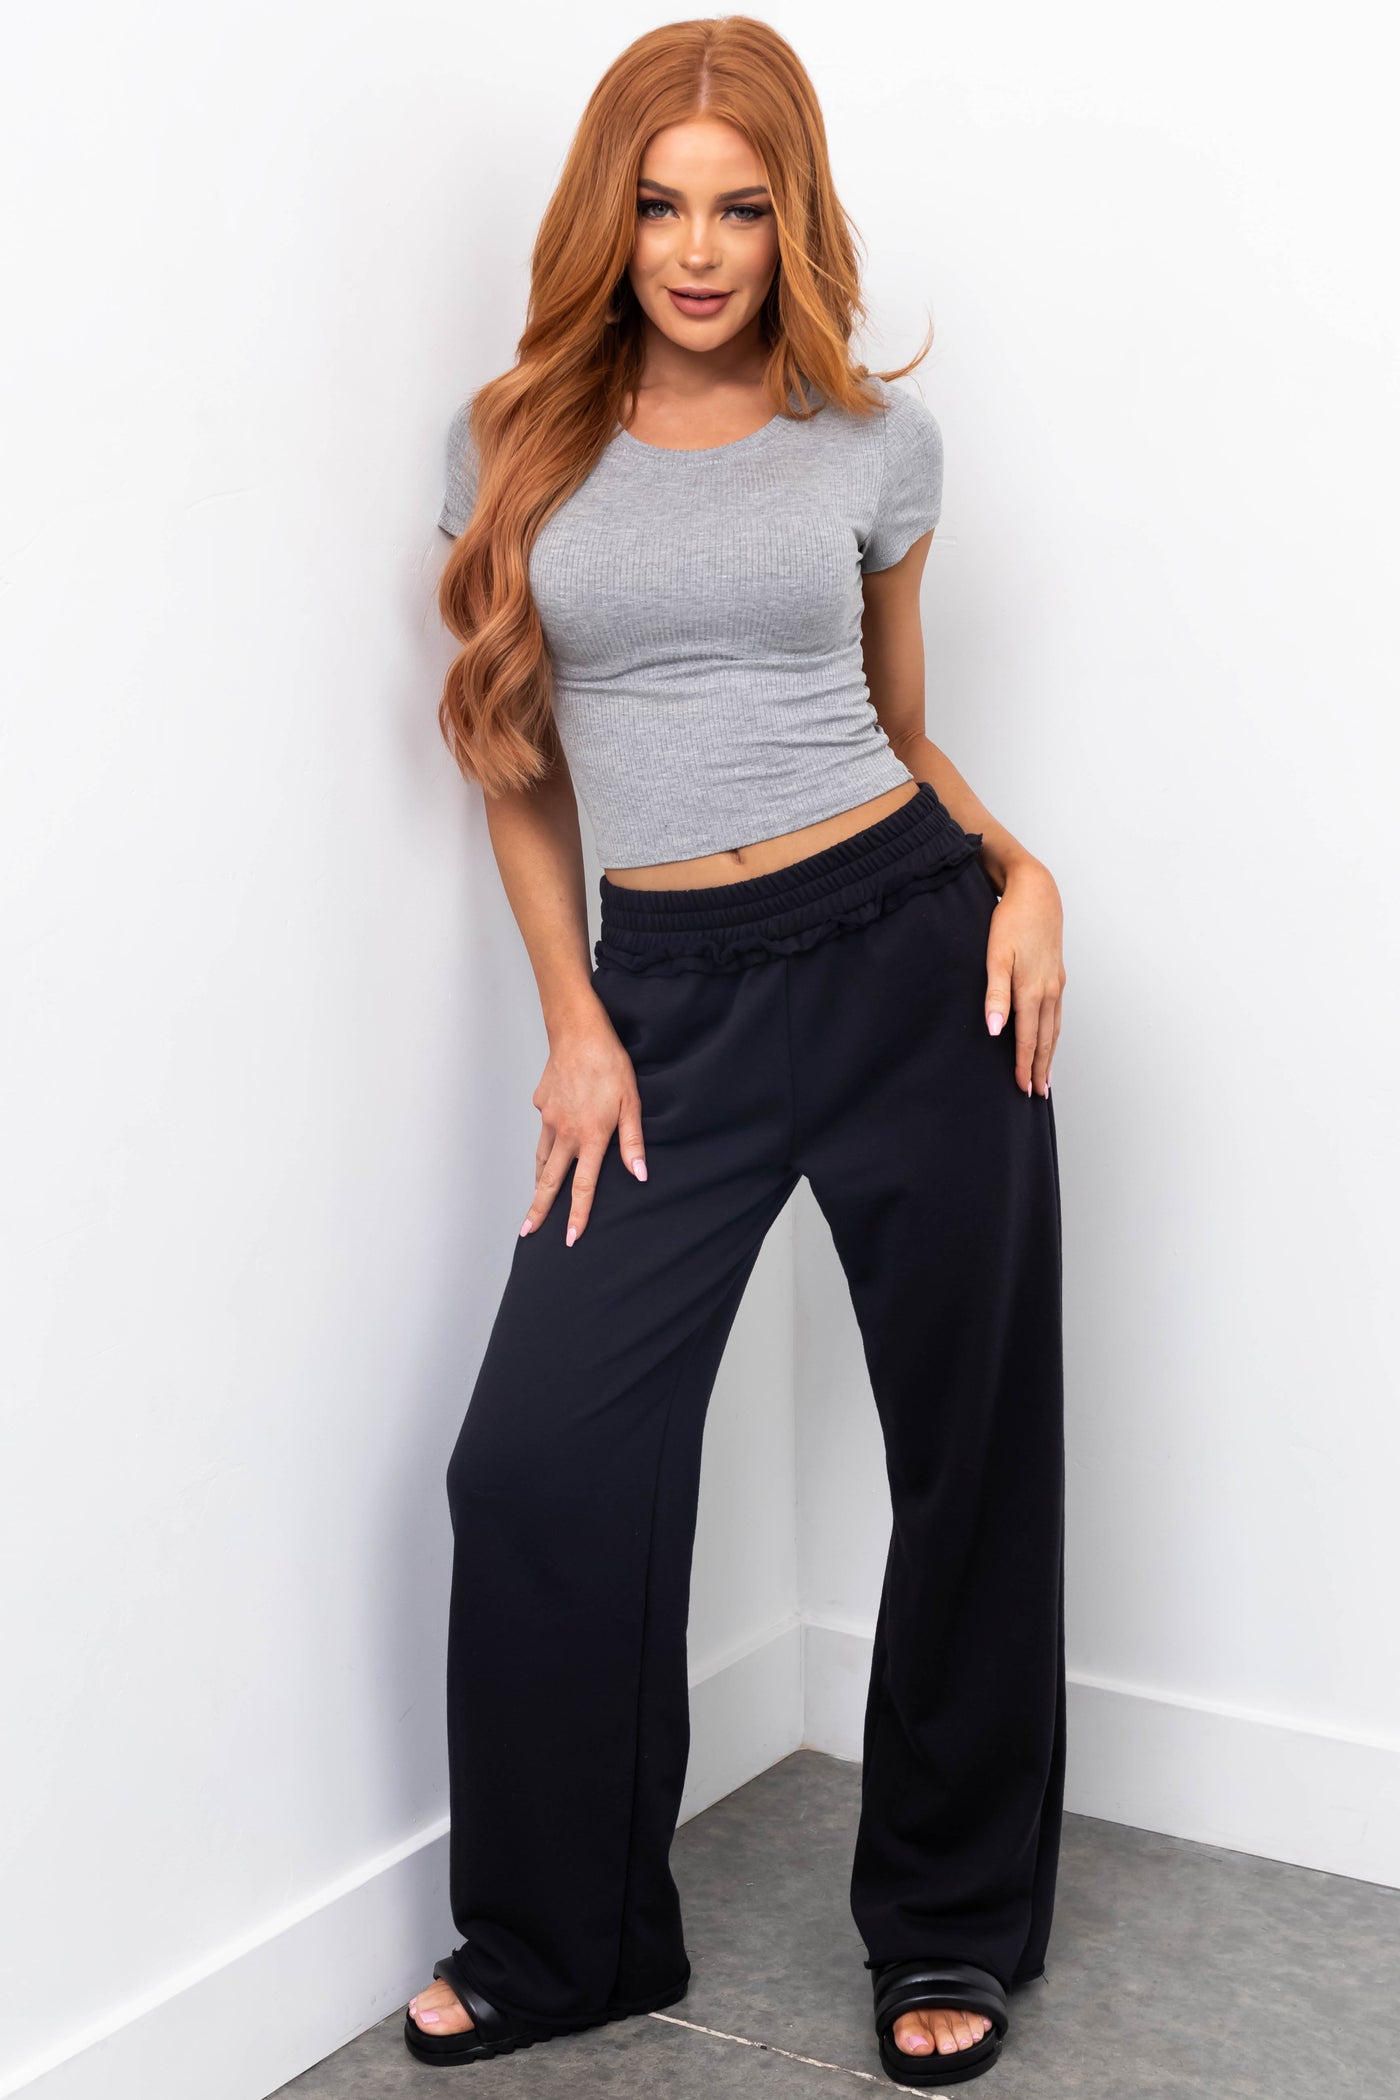 Heather Grey Short Sleeve Fitted Ribbed Knit Crop Top